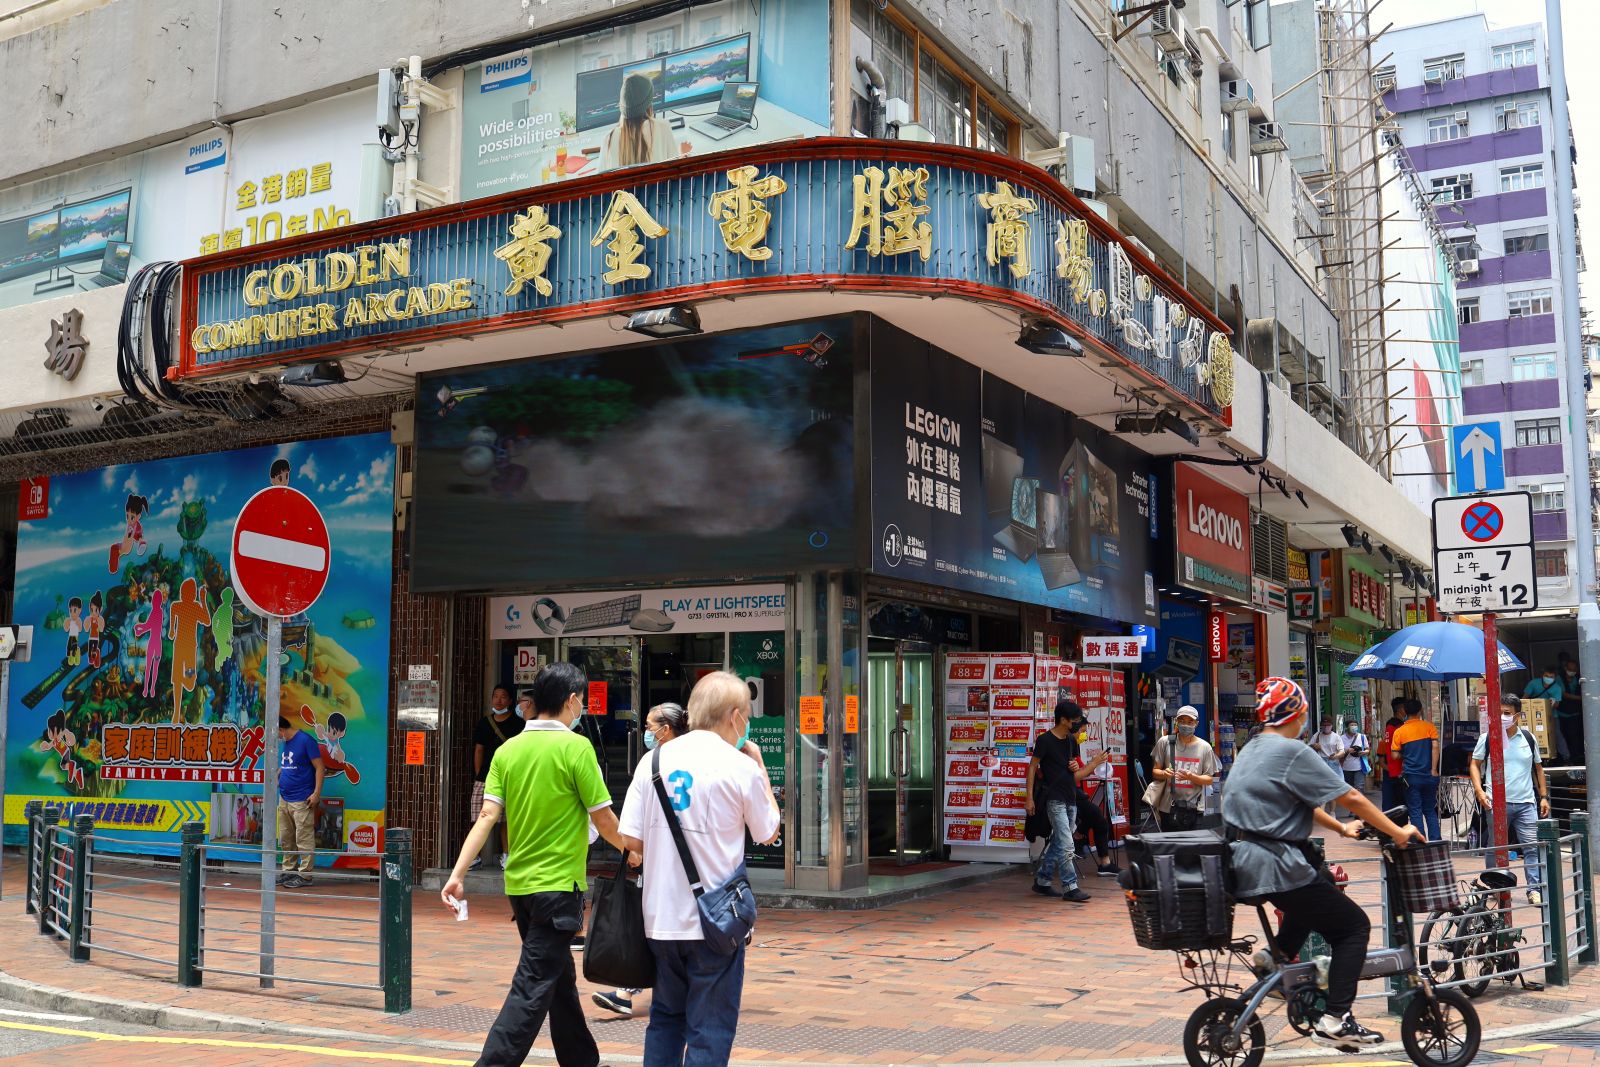 Tucked away in this working-class neighborhood, known for being Hong Kong's most frequented offline electronics marketplace.